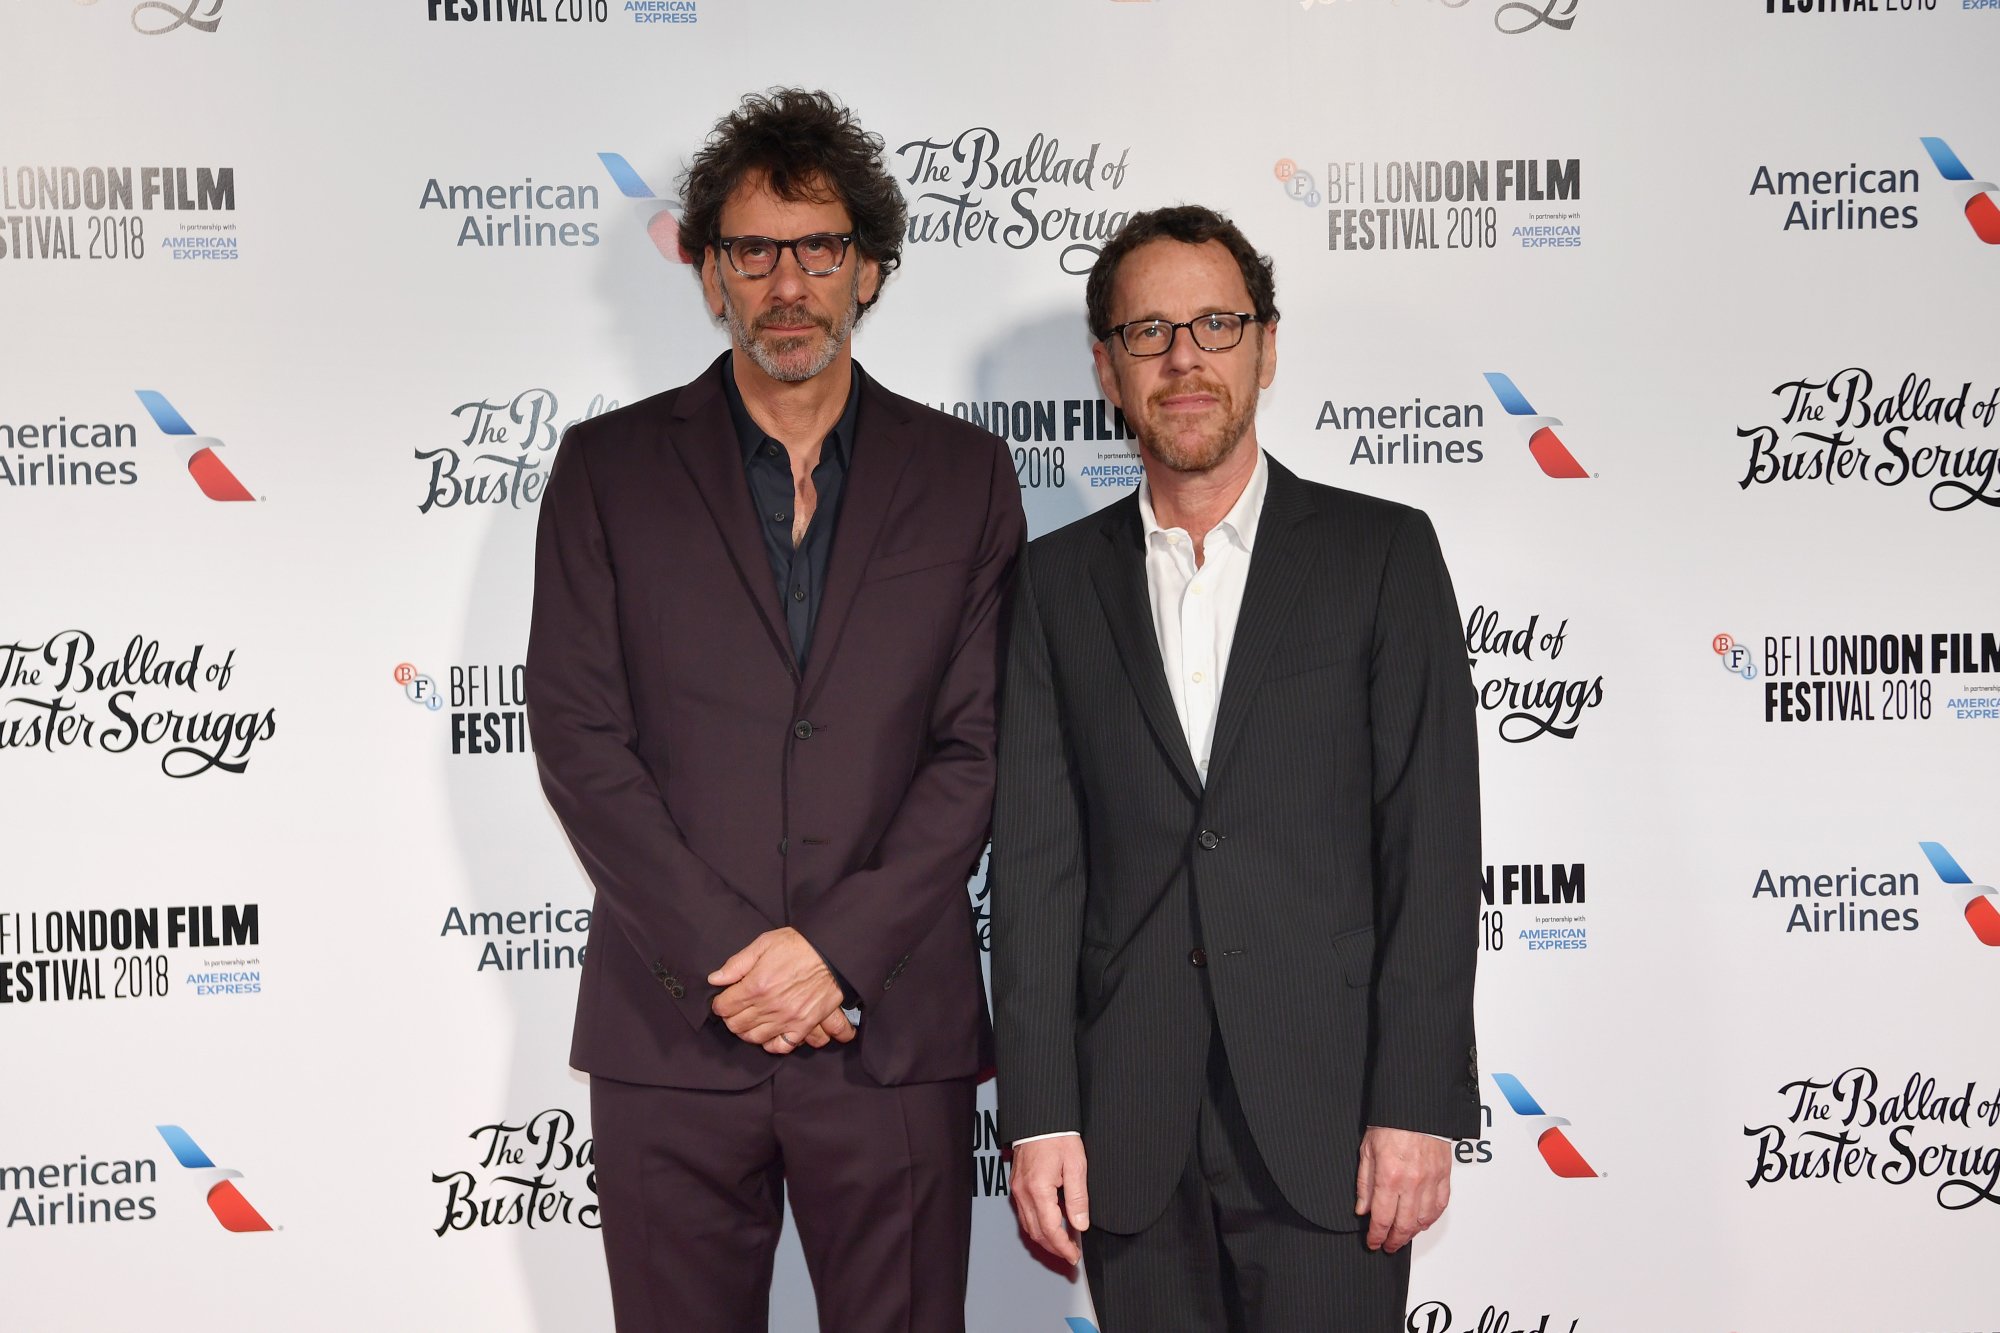 'The Tragedy of Macbeth' filmmaker Joel Coen and his brother Ethan Coen standing in front of a white step and repeat